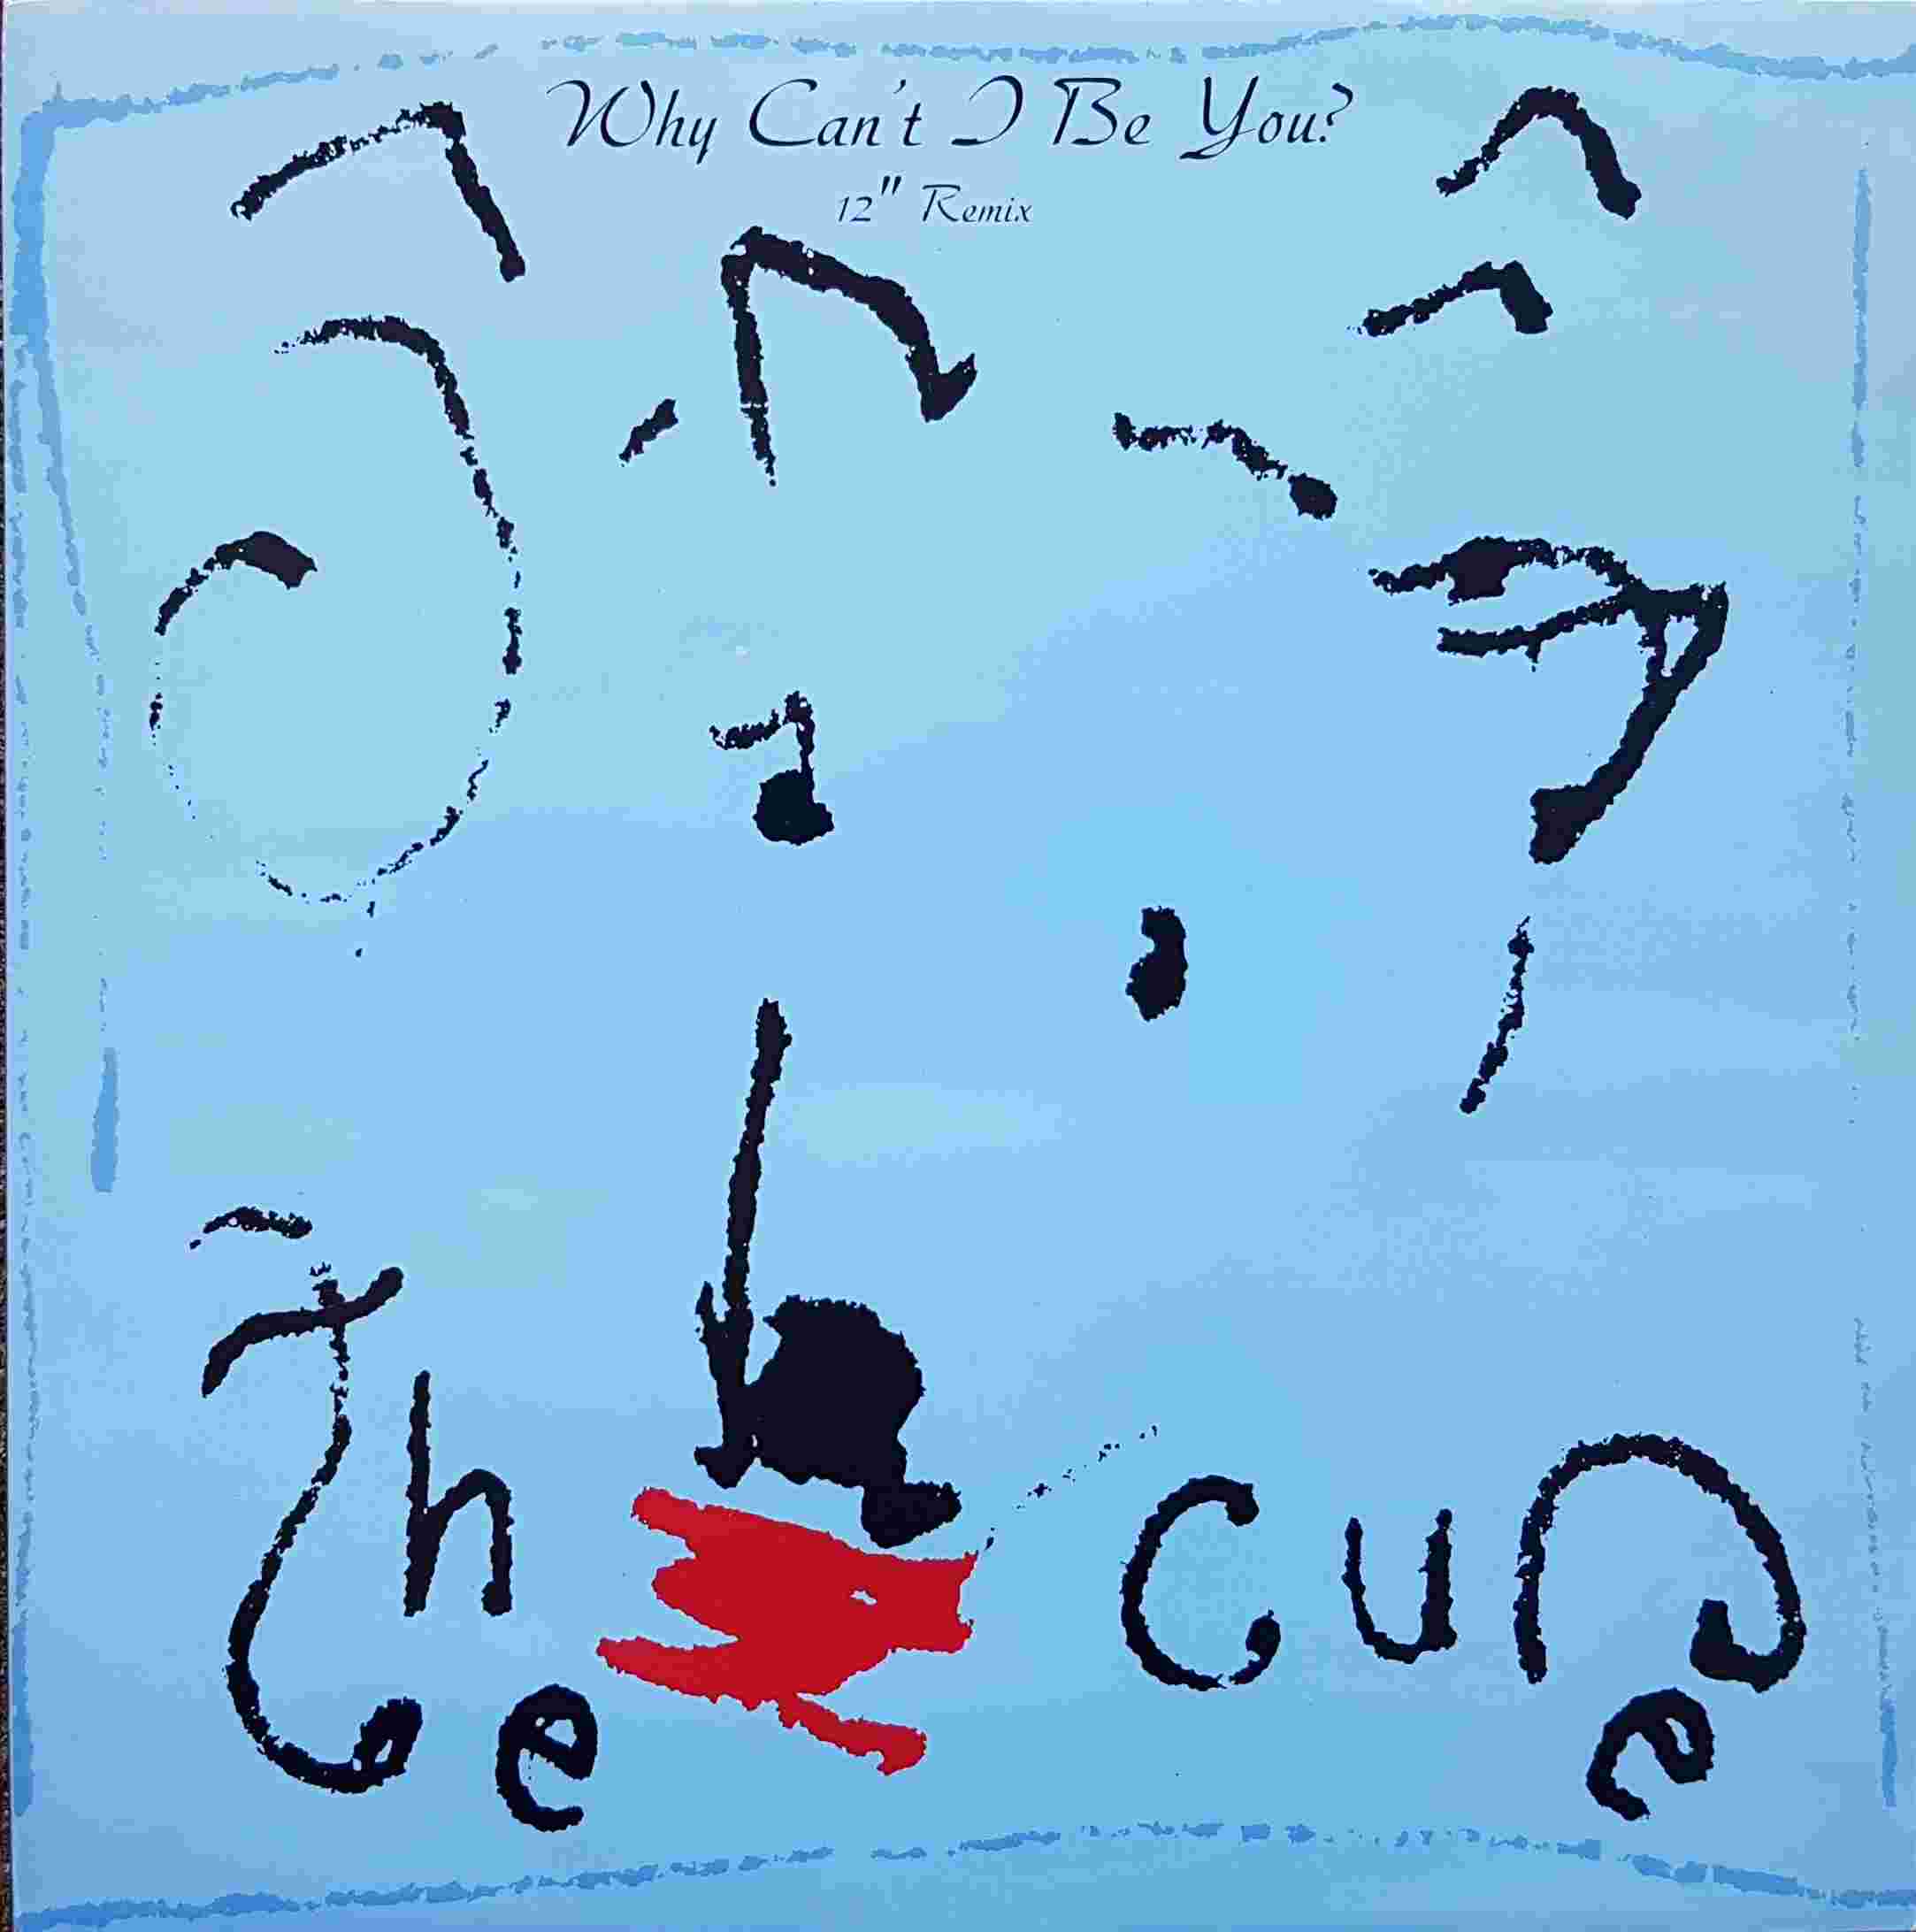 Picture of FICSX 25 Why can't I be you by artist The Cure  